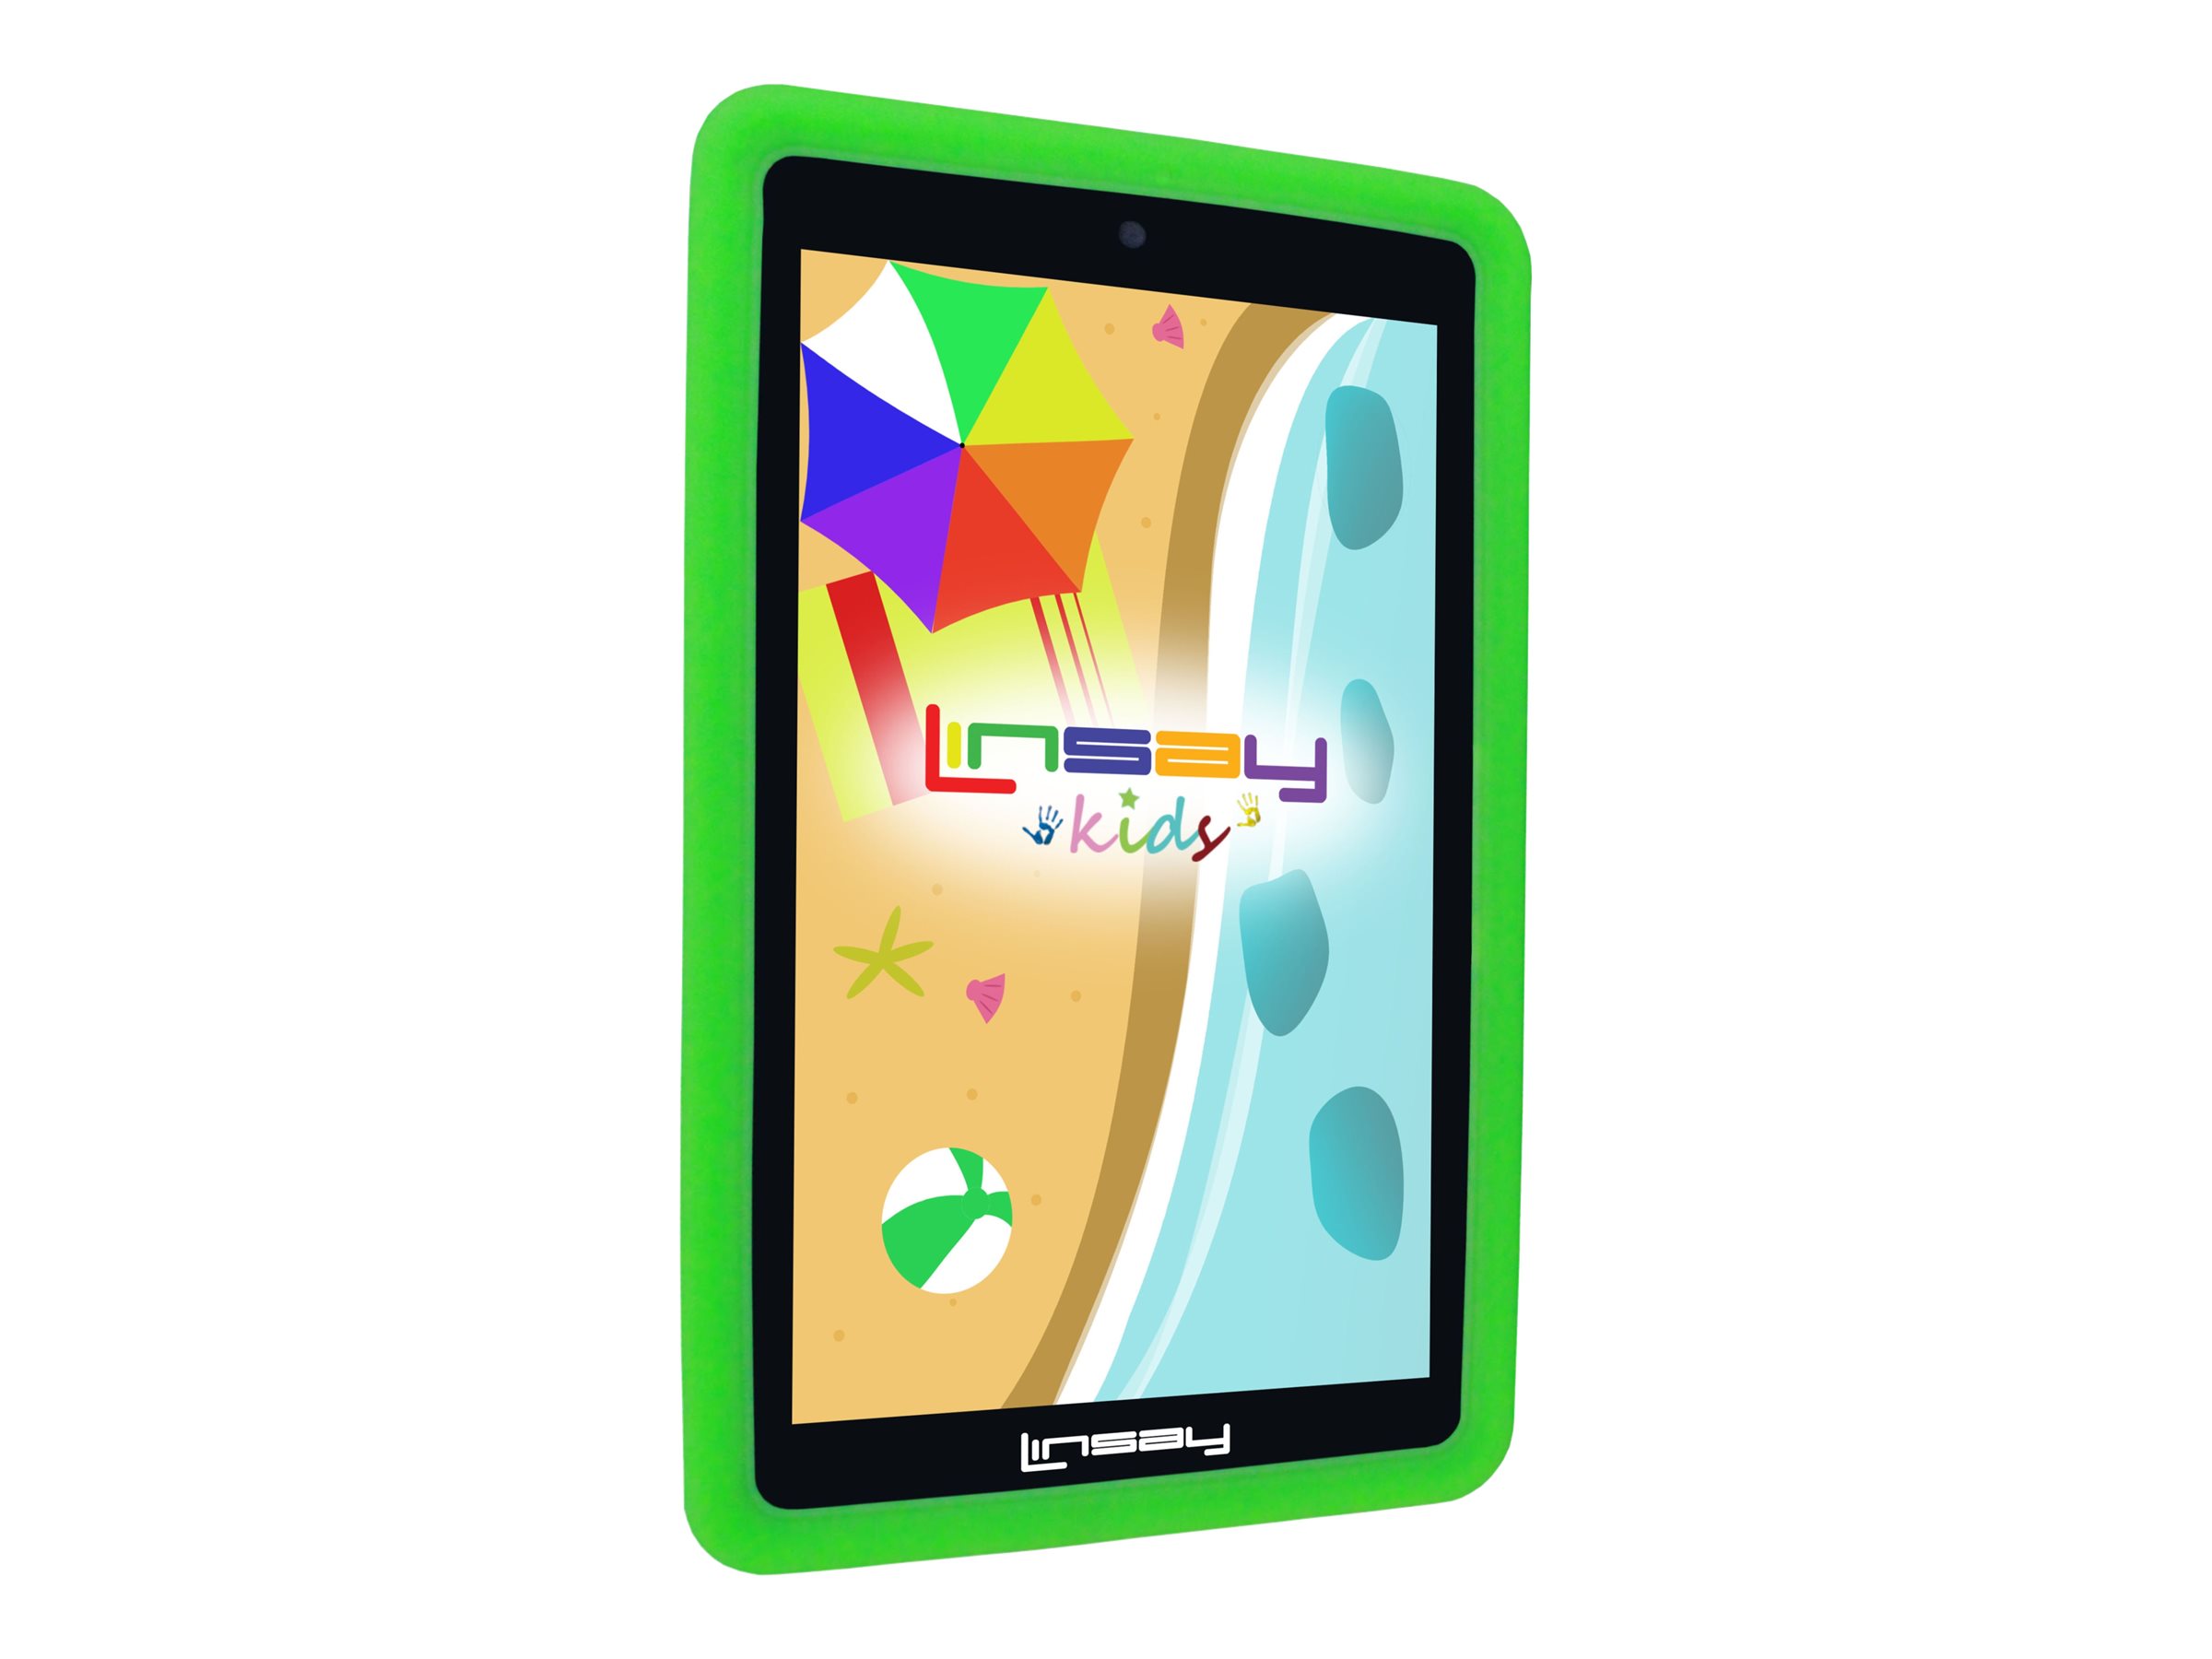 LINSAY 7" Kids Tablet 2GB RAM 32GB Android 12 WiFi Tablet for Children, Camera, Apps, Games, with Green Kid Defender Case LED Book Pack - image 2 of 7